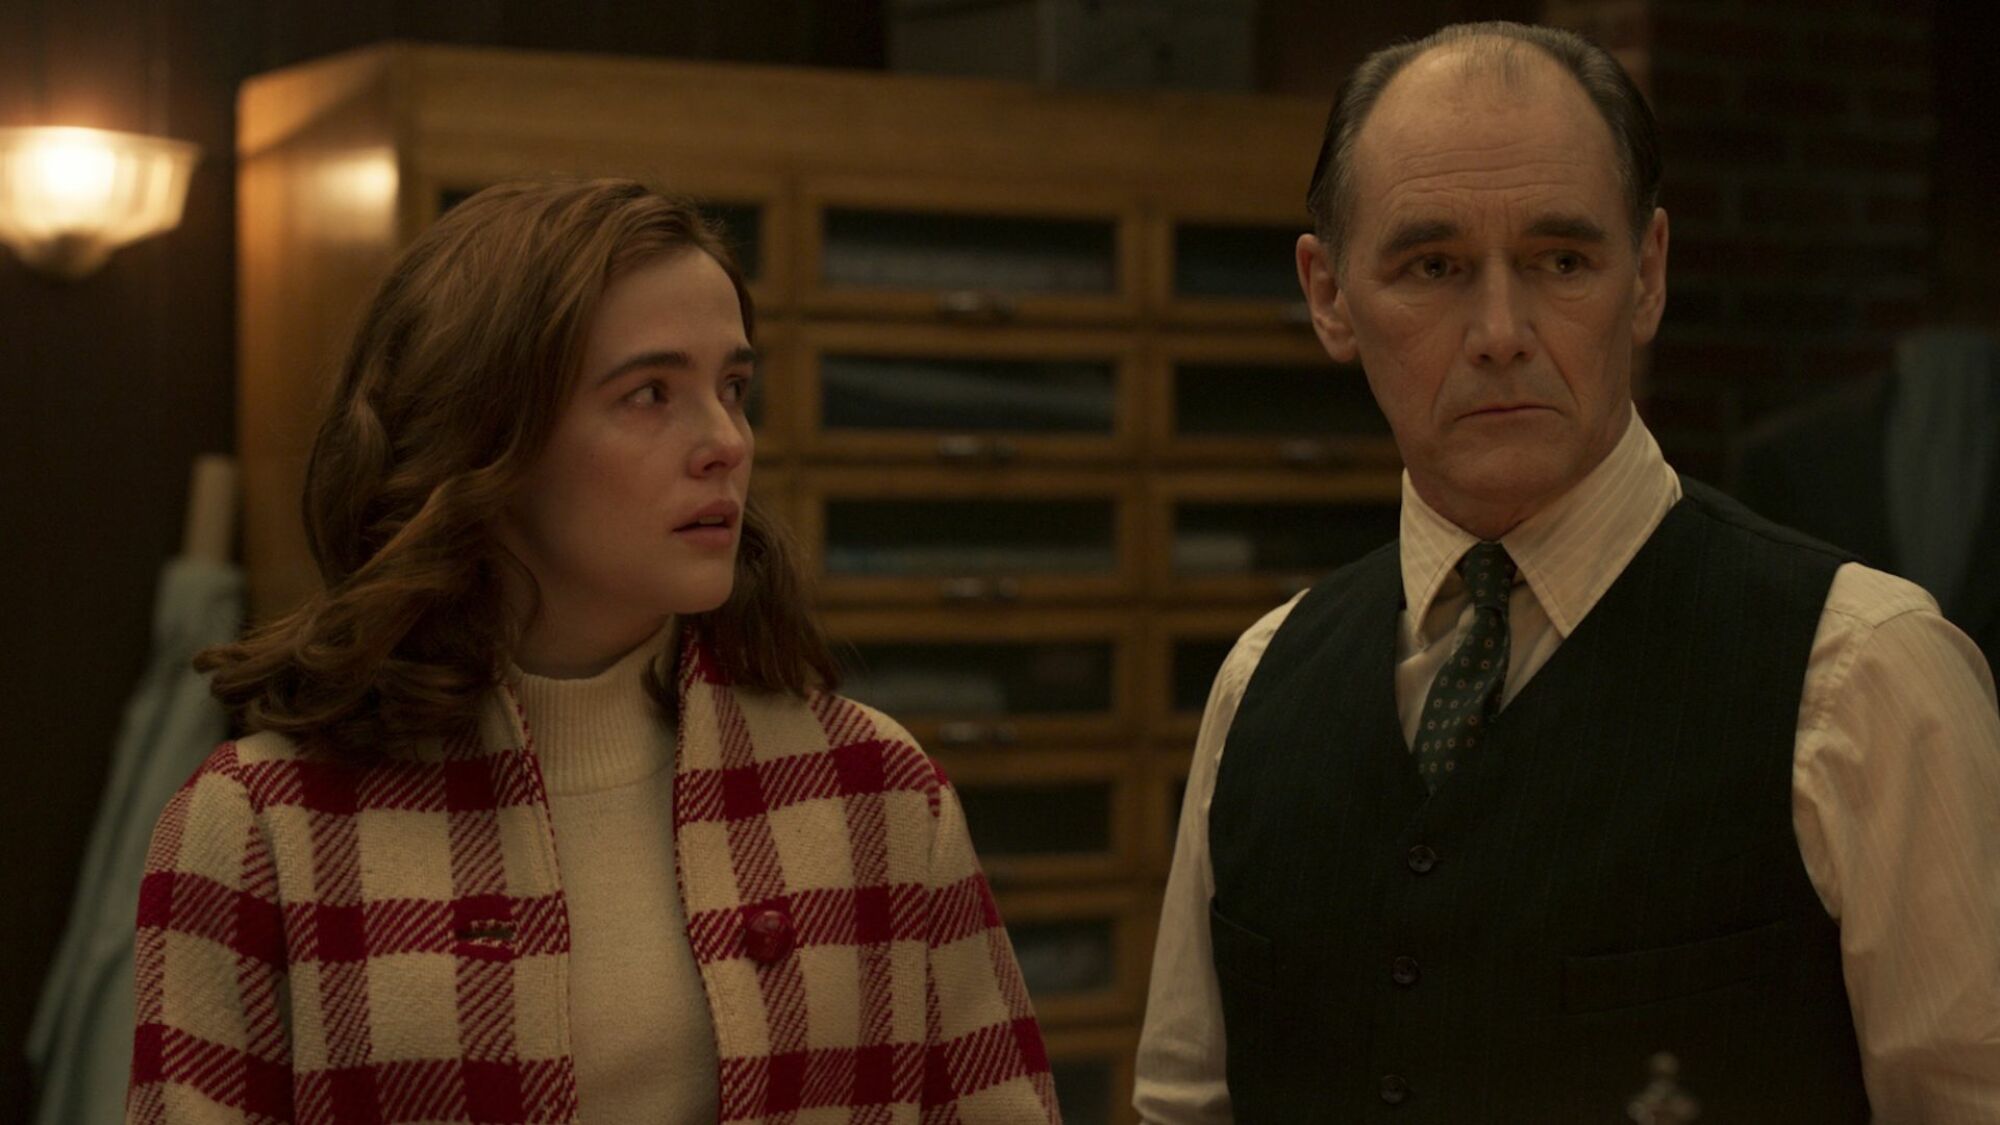  Mark Rylance and Zoey Deutch in "The Outfit."